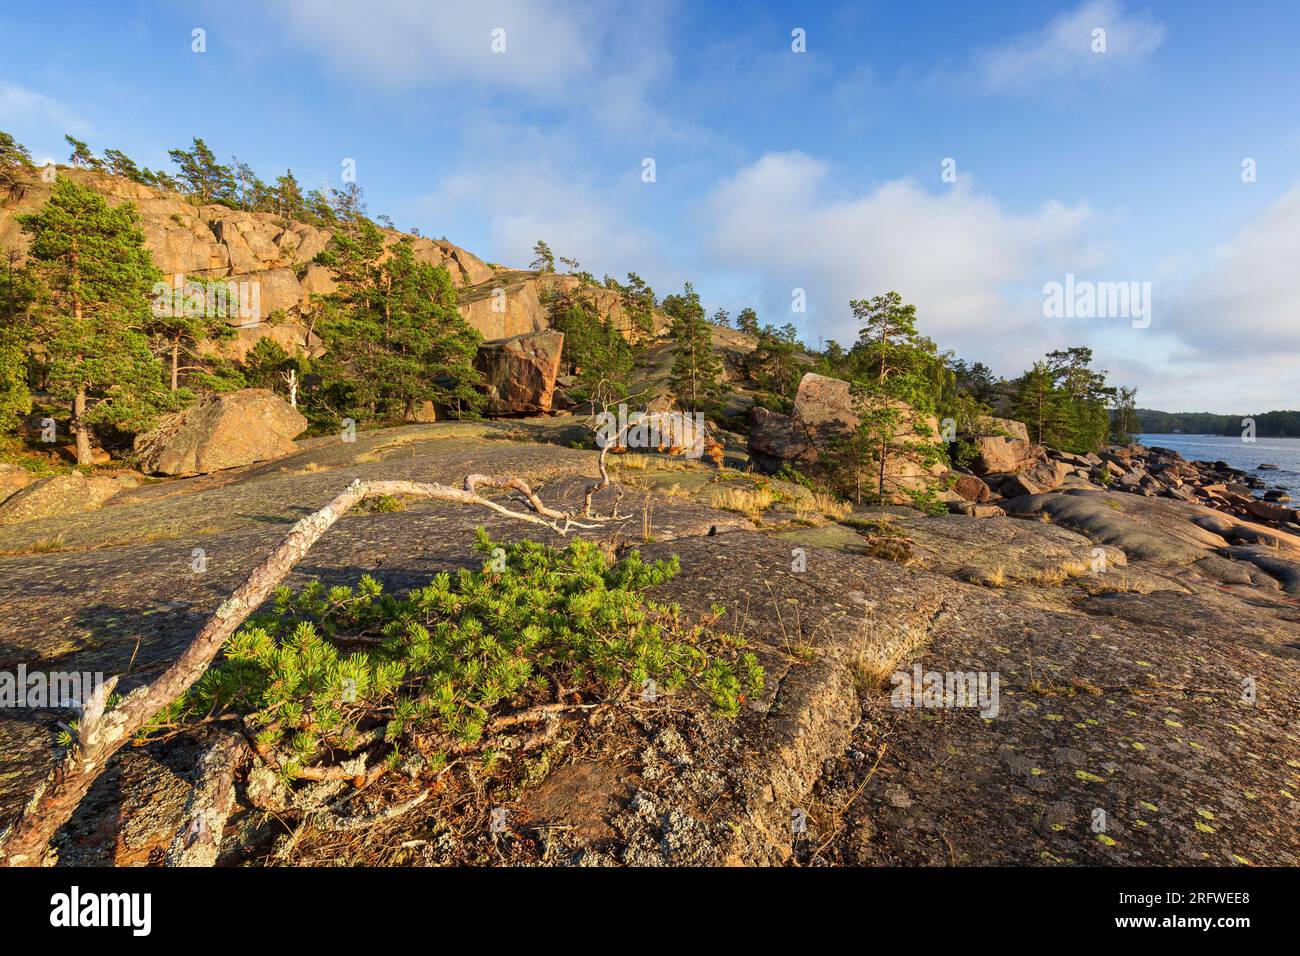 Scenic landscape of rugged rocks&cliffs by the sea at Geta in Åland Islands, Finland, on a sunny day in the summer. Off the beaten path in the nature. Stock Photo